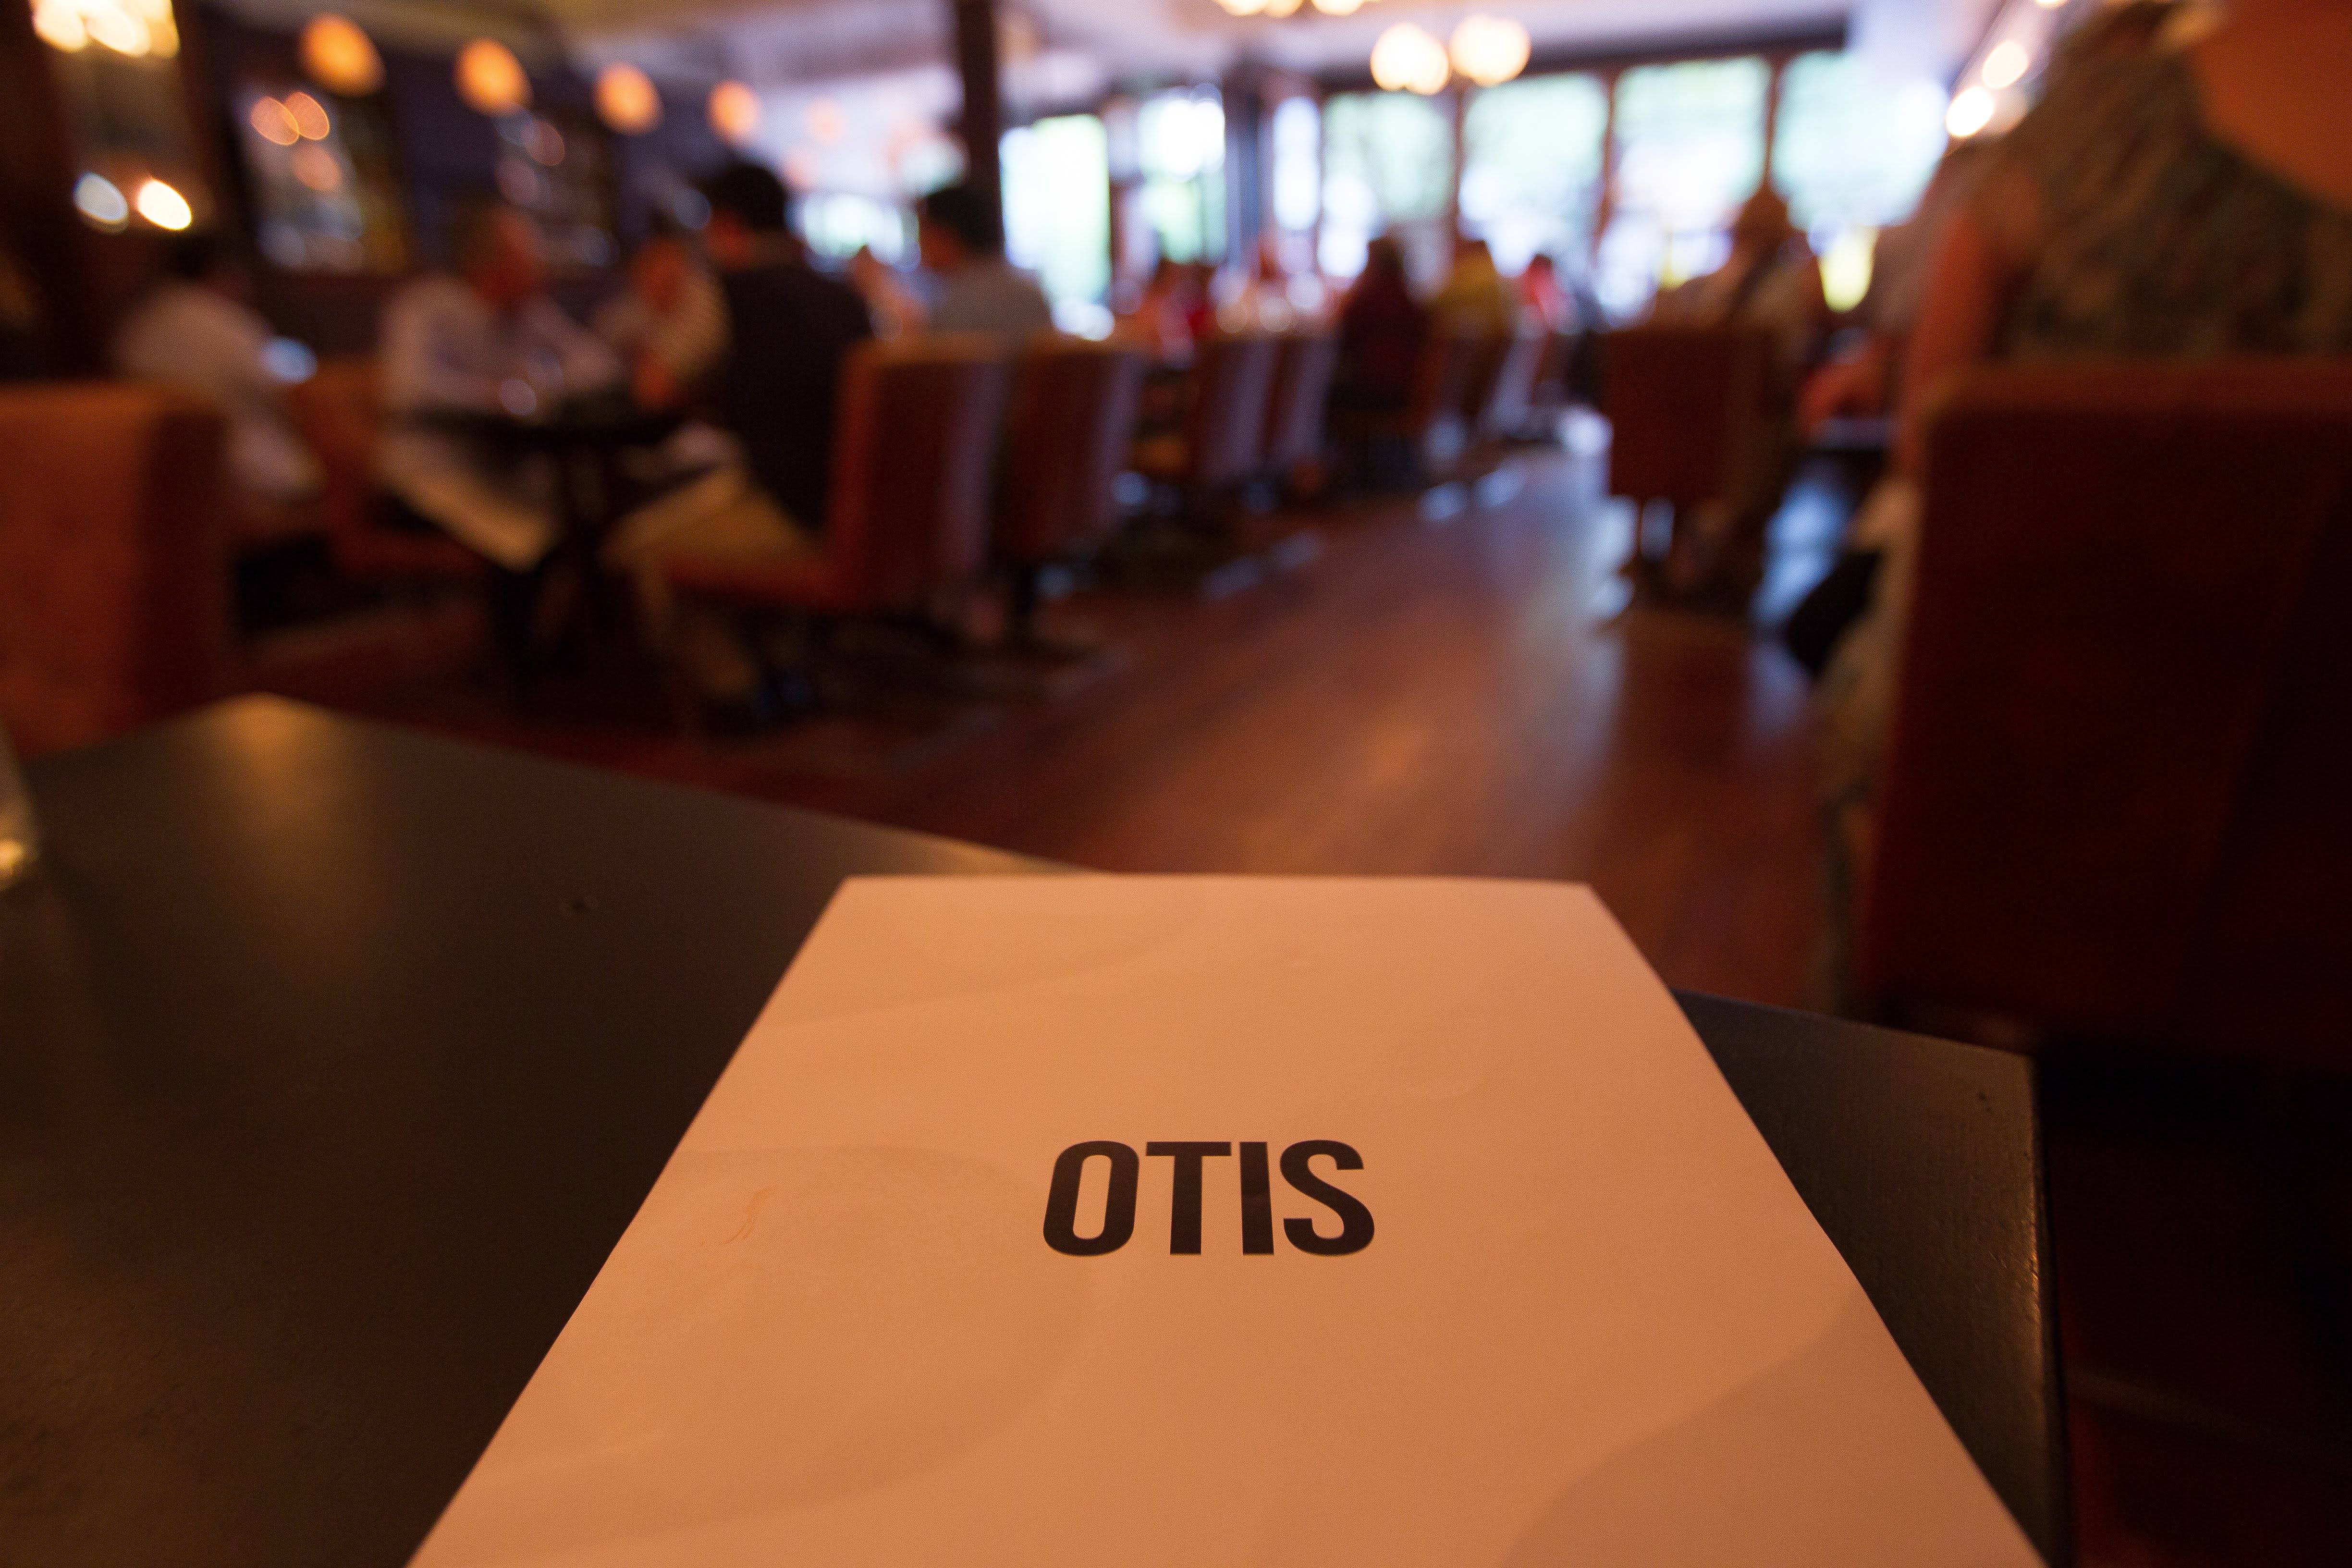 The five star local: Kingston's OTIS gets the balance right